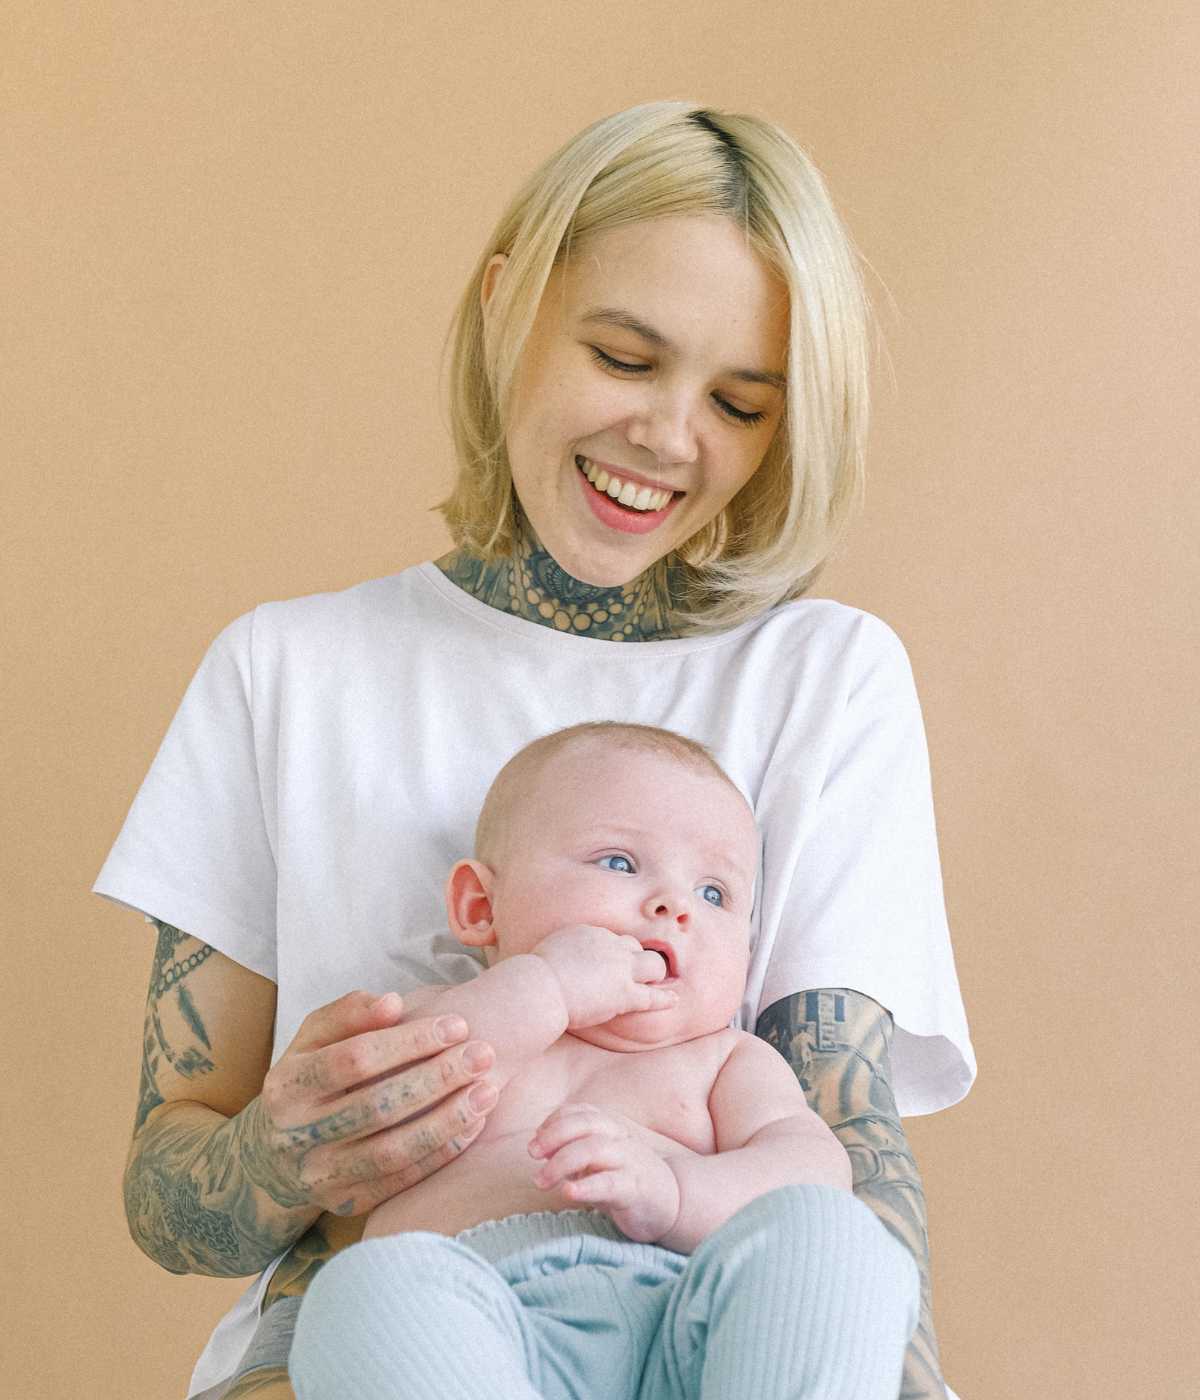 Can You Get a Tattoo While Breastfeeding? Mila's Keeper